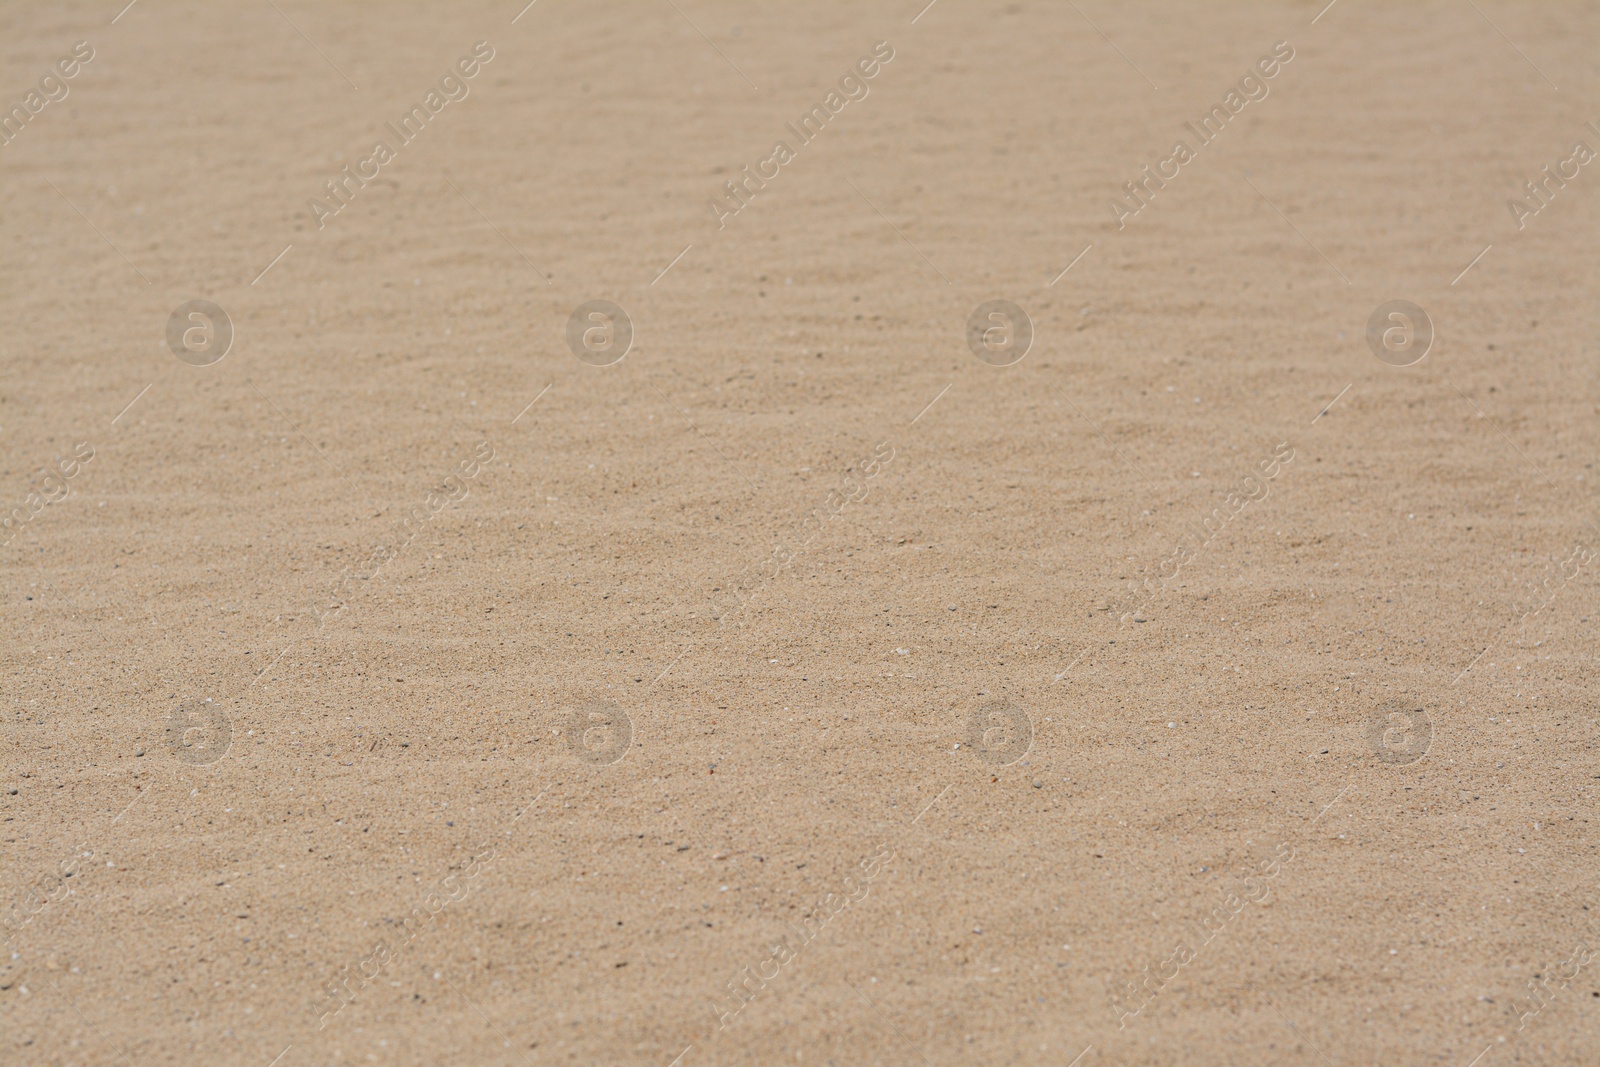 Photo of Dry beach sand as background, closeup view